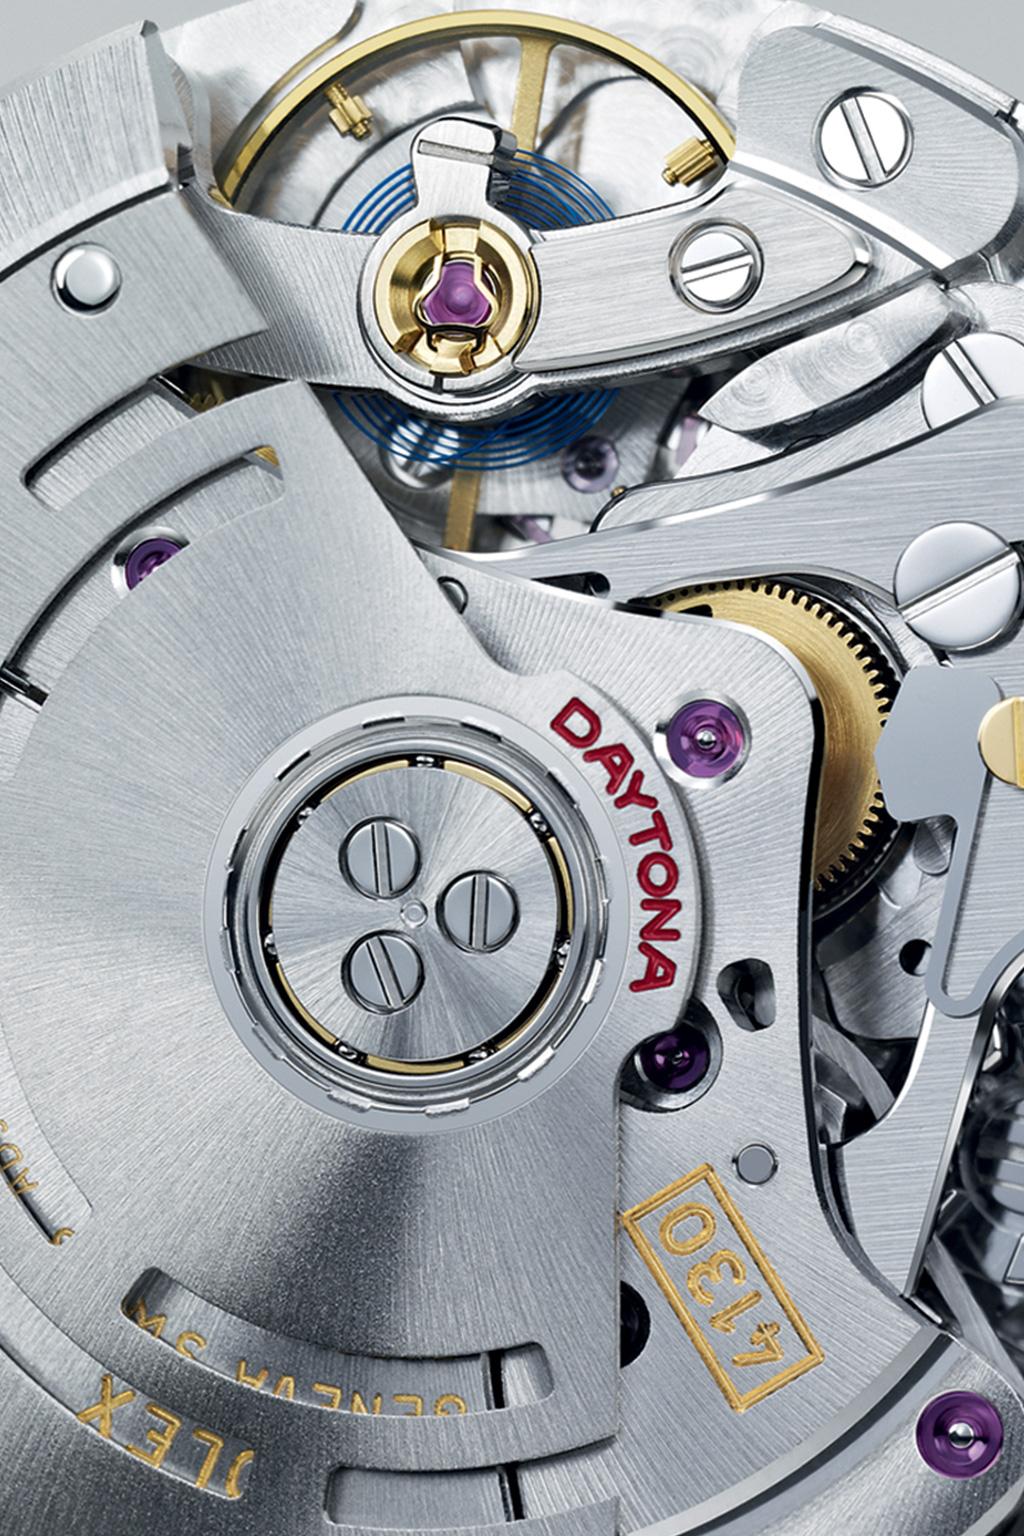 4130 VERTICAL CLUTCH AND INCREASED PRECISION The Cosmograph Daytona is equipped with a new-generation self winding chronograph movement calibre 4130 entirely designed and manufactured in-house.